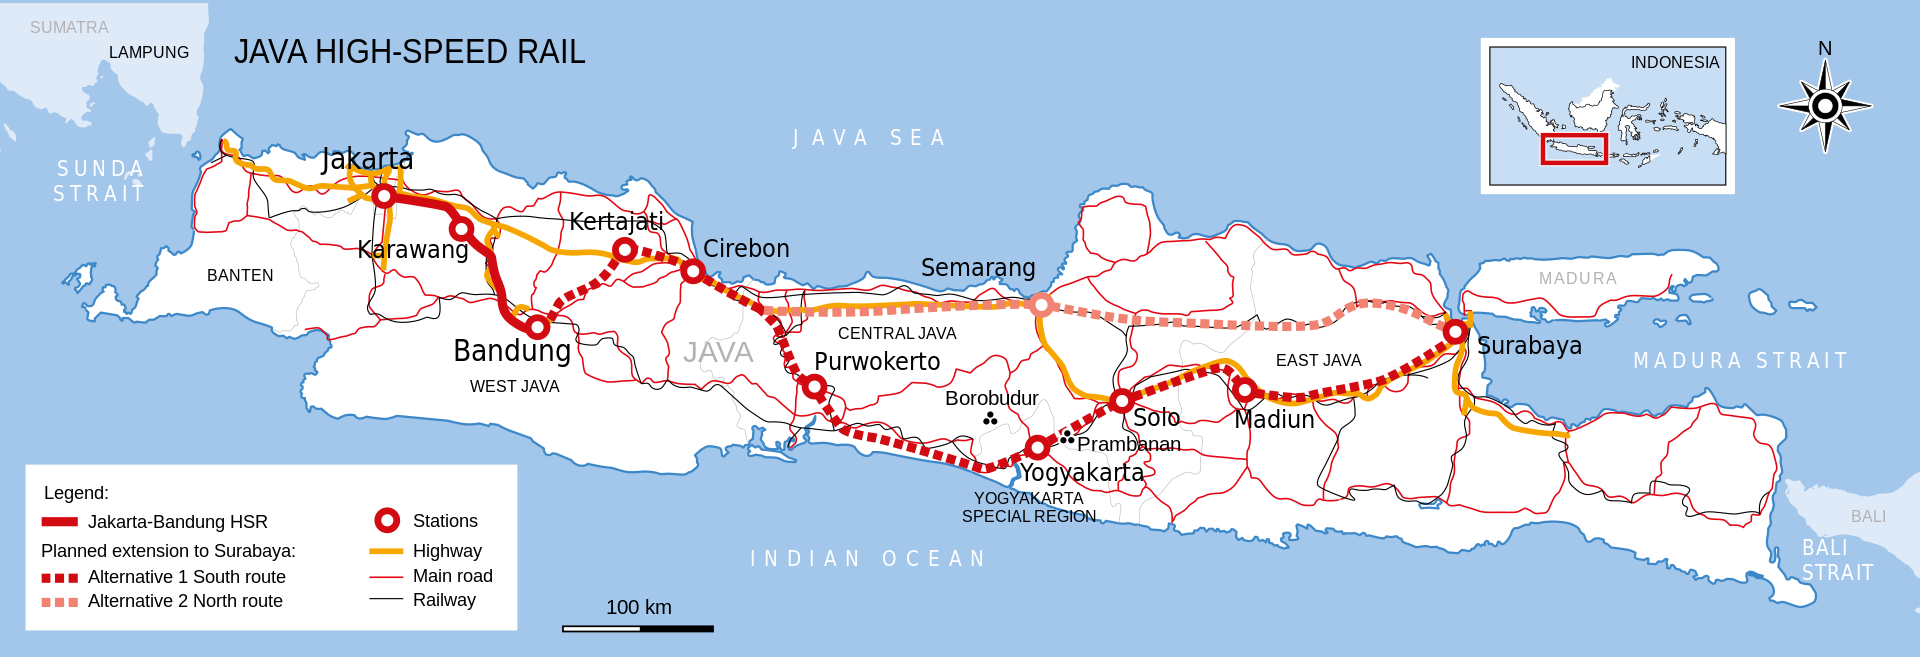 [Image: 1920px-Java_High-speed_Rail_Indonesia.svg.png]